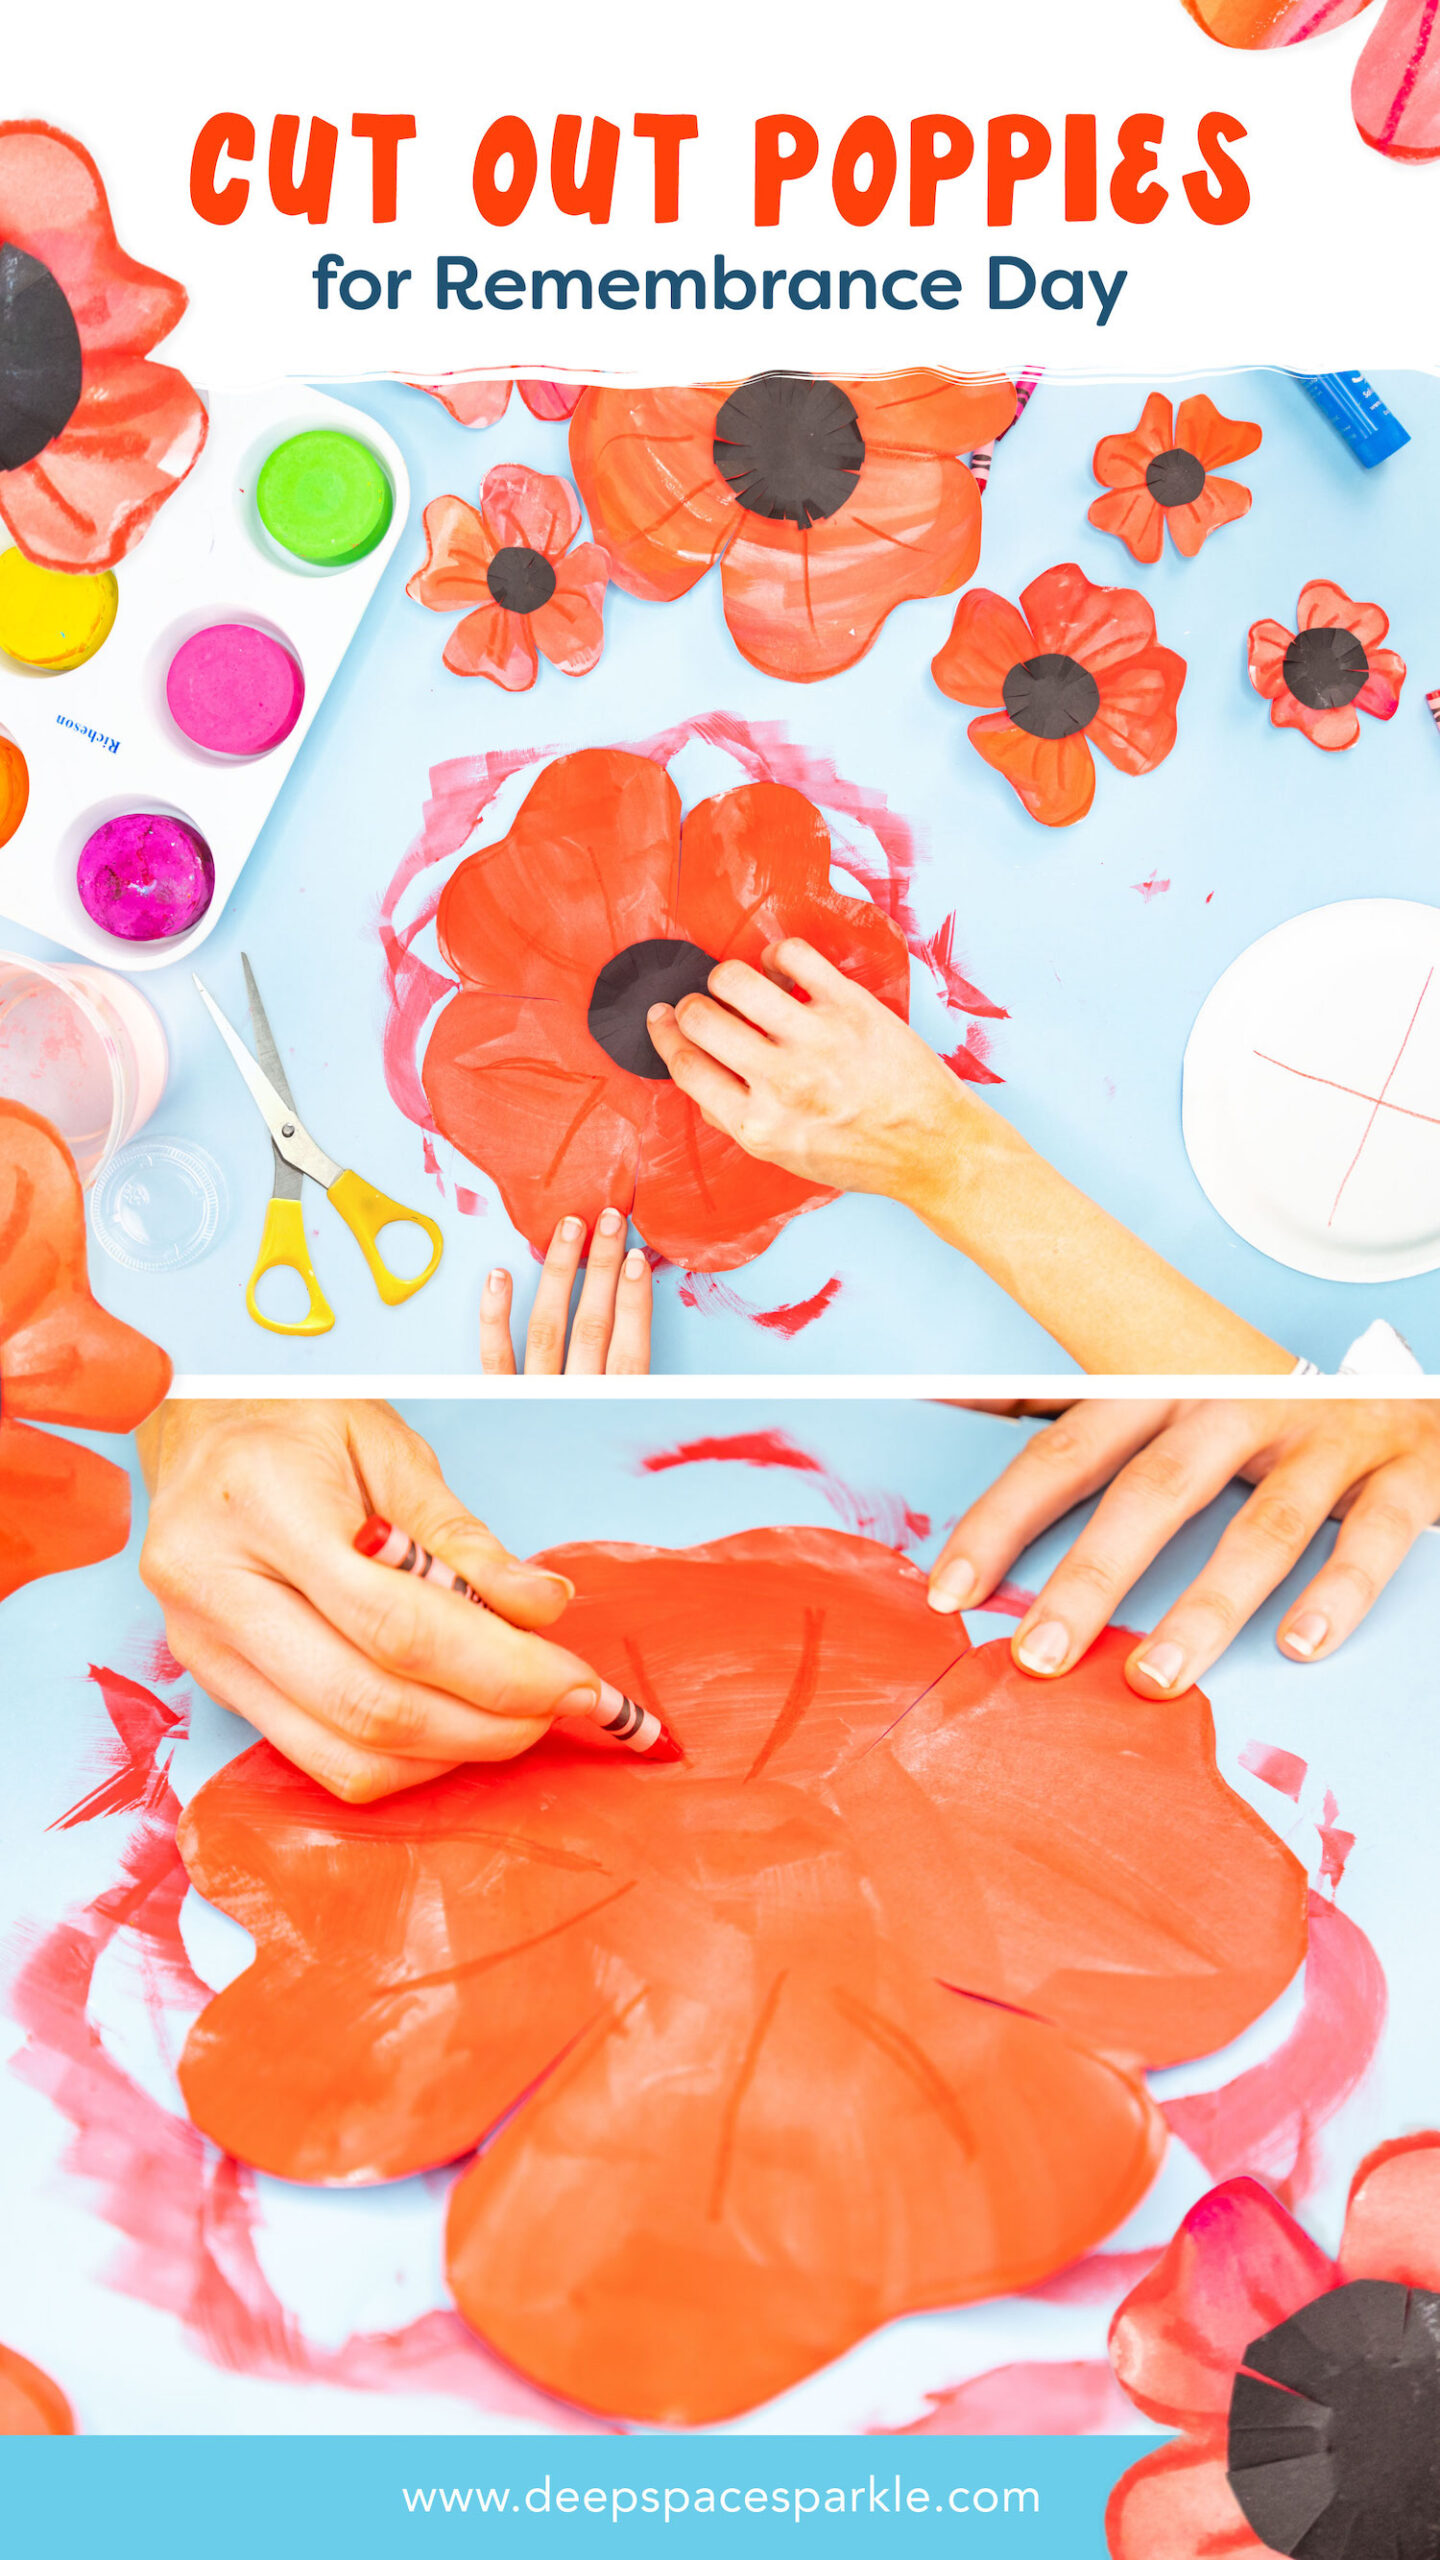 Cut Out Poppies to honor Remembrance Day with your students in the art room